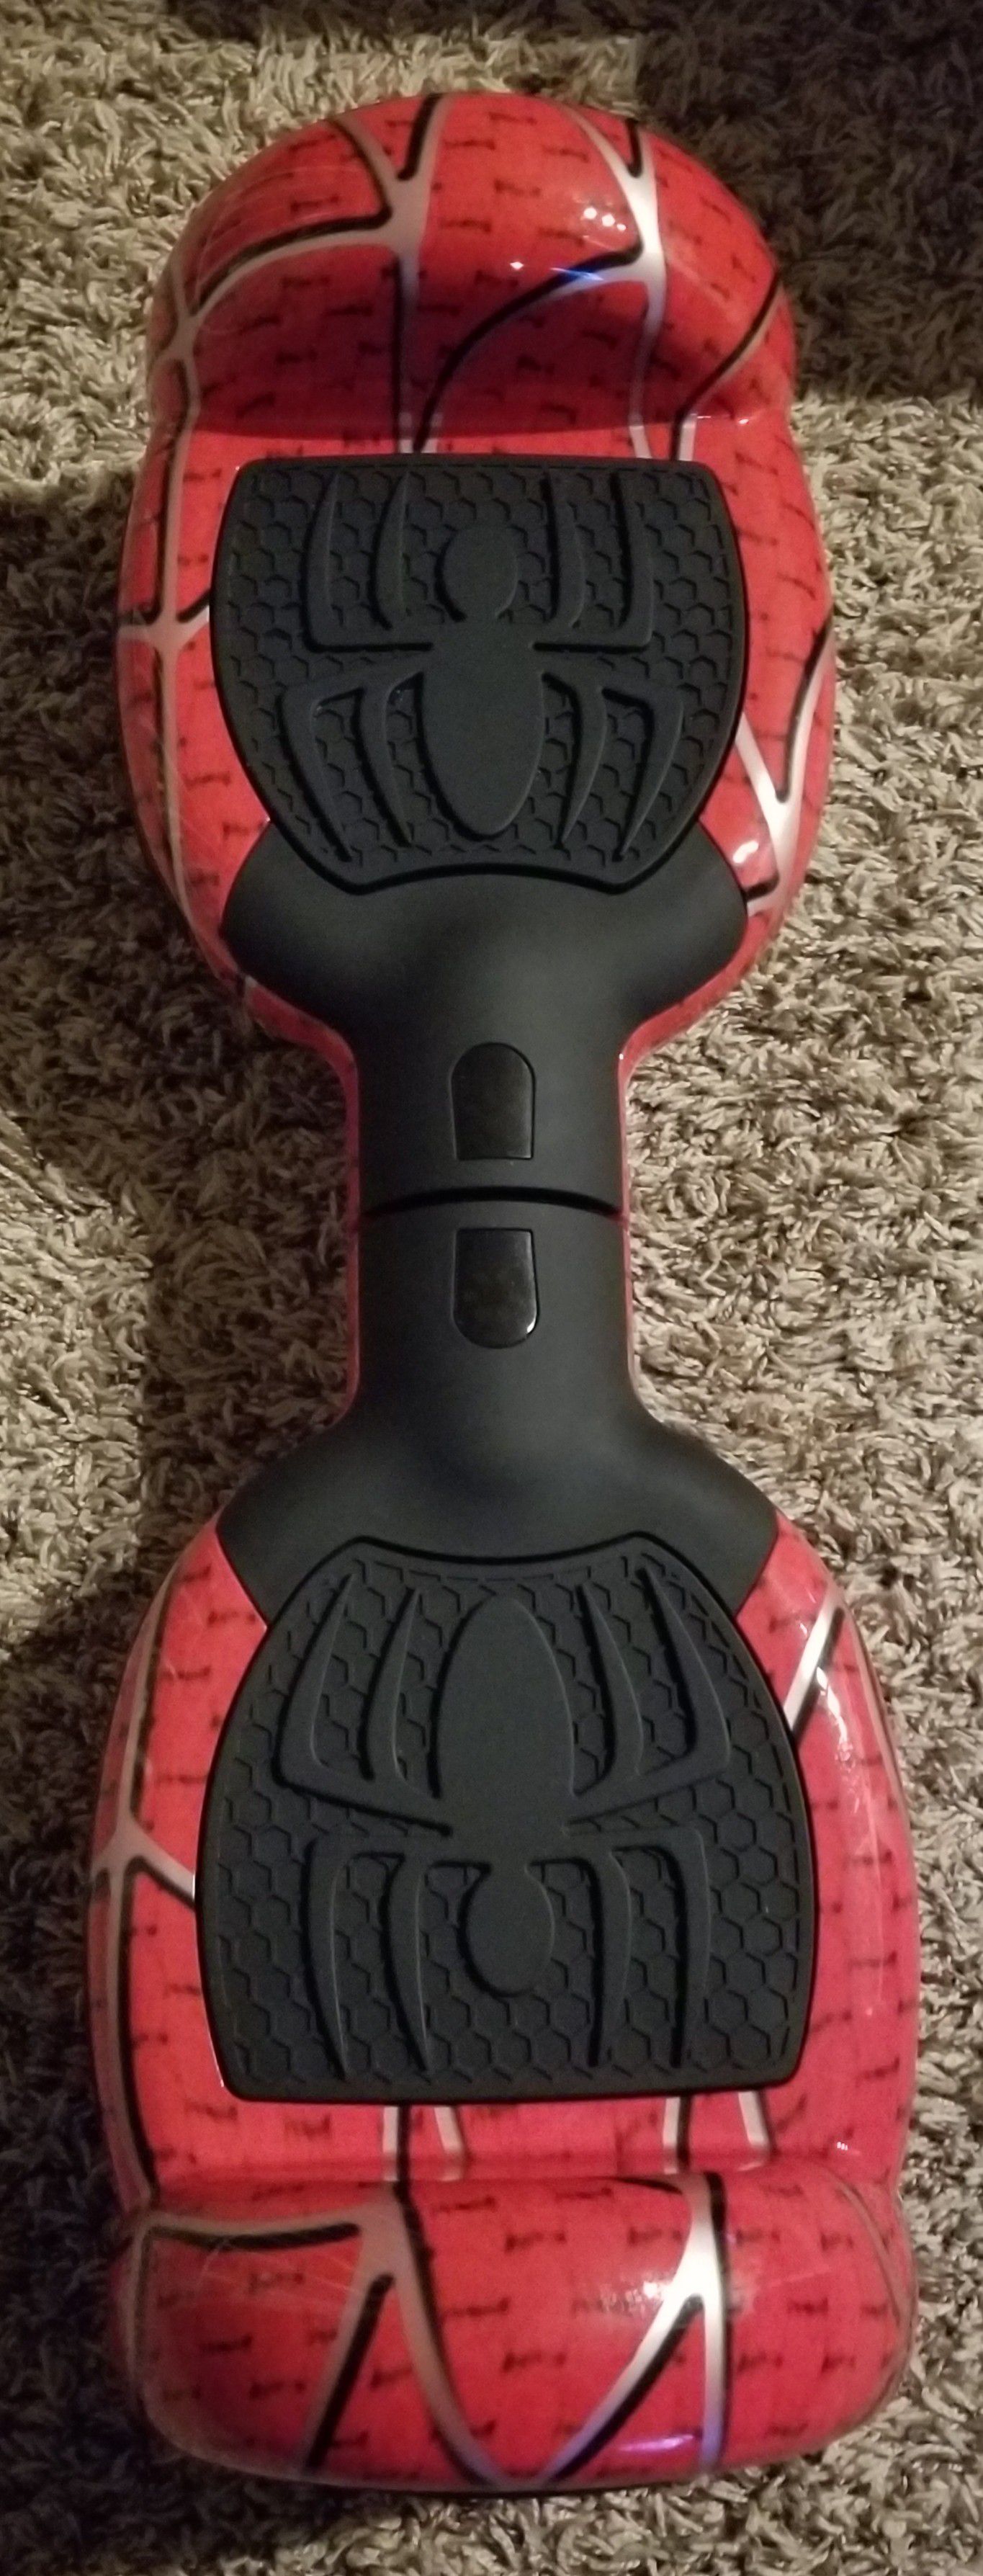 Hoverboard spiderman w/bluetooth (new in box)